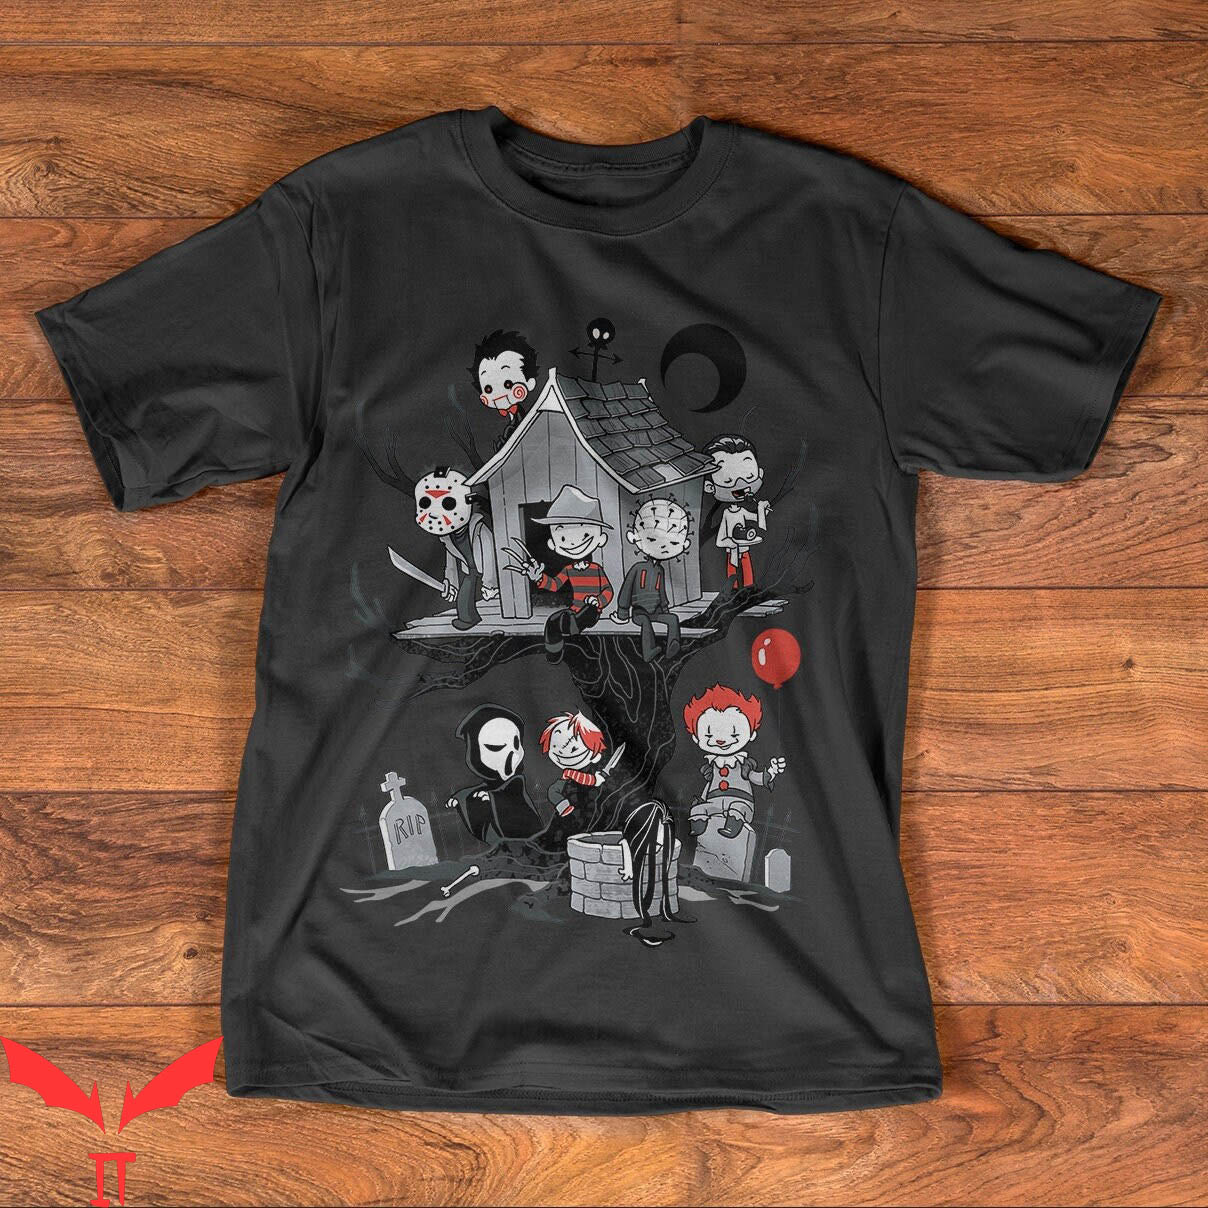 Pennywise Friends T-Shirt Horror Scary Halloween IT Movie